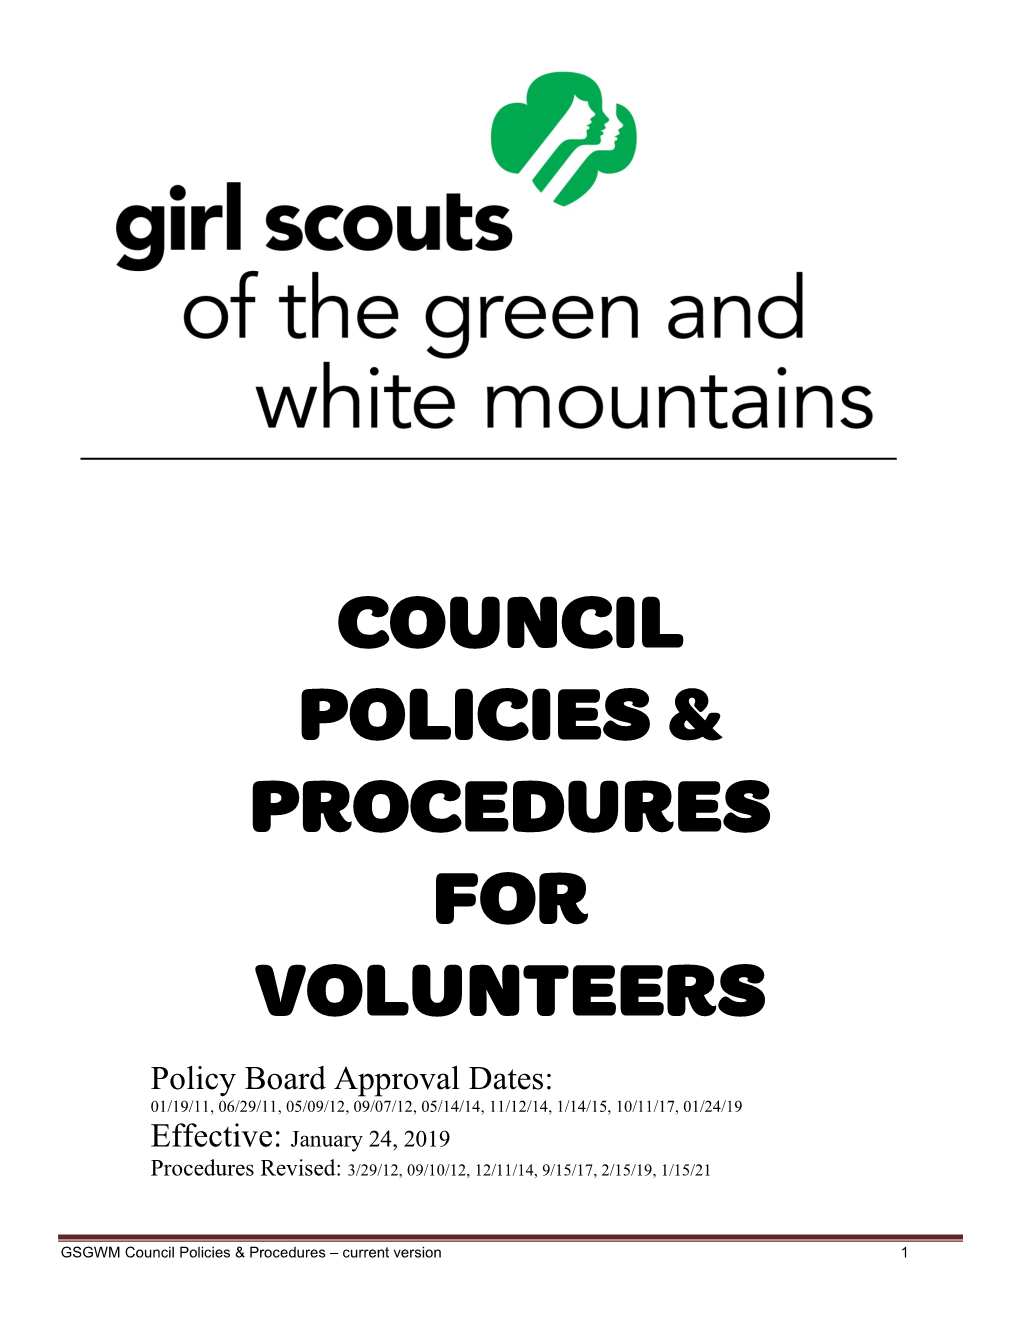 GSGWM Council Policies and Procedures for Volunteers